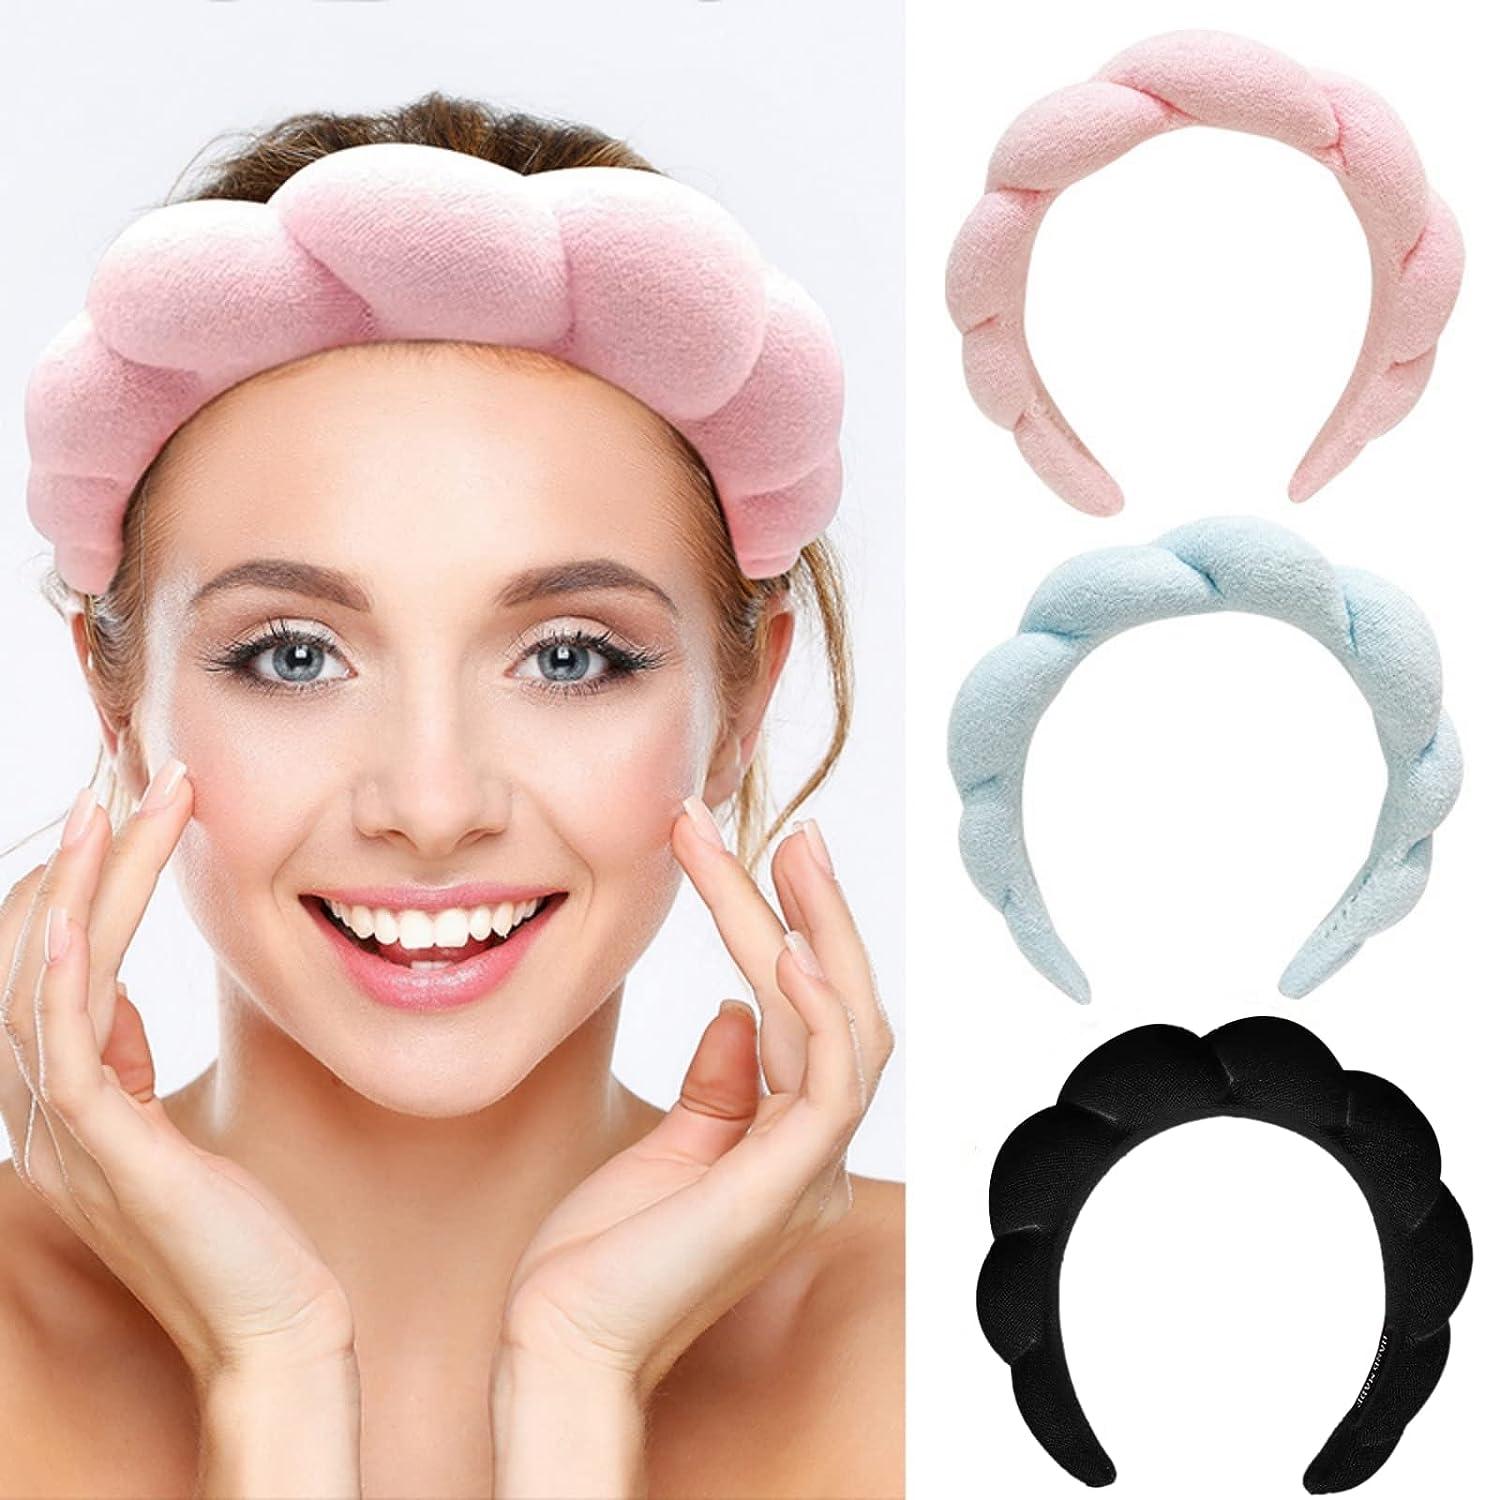 Spa Makeup Headband for Washing Face, Sponge Skincare Face Wash headbands  for Women Girls - Bubble Soft Terry Towel Cloth Hair Band for Skincare  Makeup Removal, Puffy Non Slip Thick Headwear(Pink) 